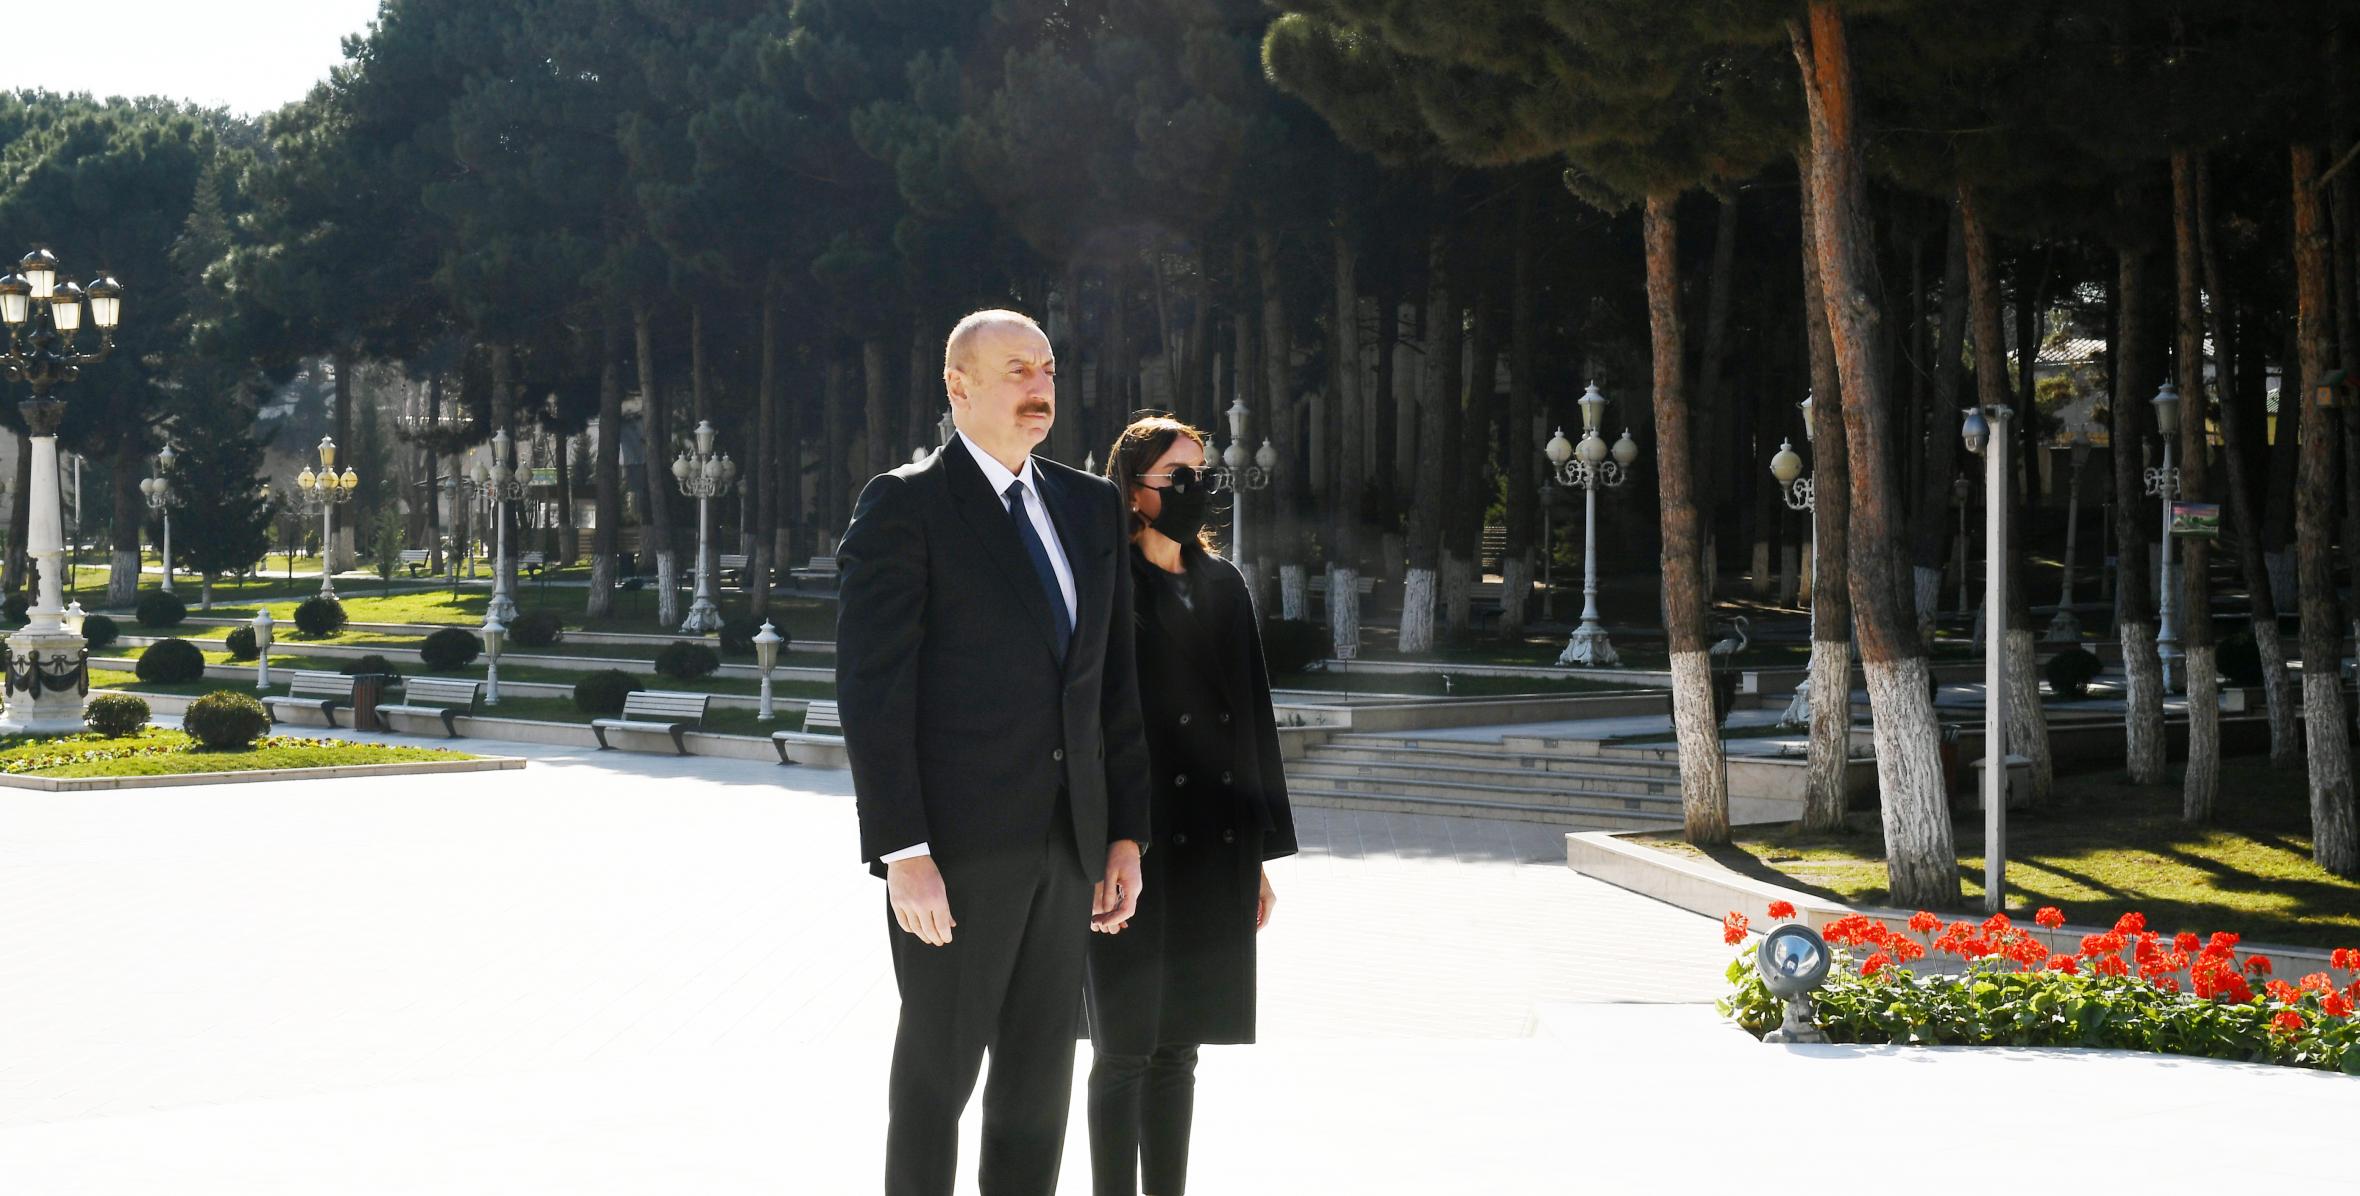 Ilham Aliyev and First Lady Mehriban Aliyeva inaugurated several social facilities in Absheron district, as well as newly laid forest-park in Yasamal district